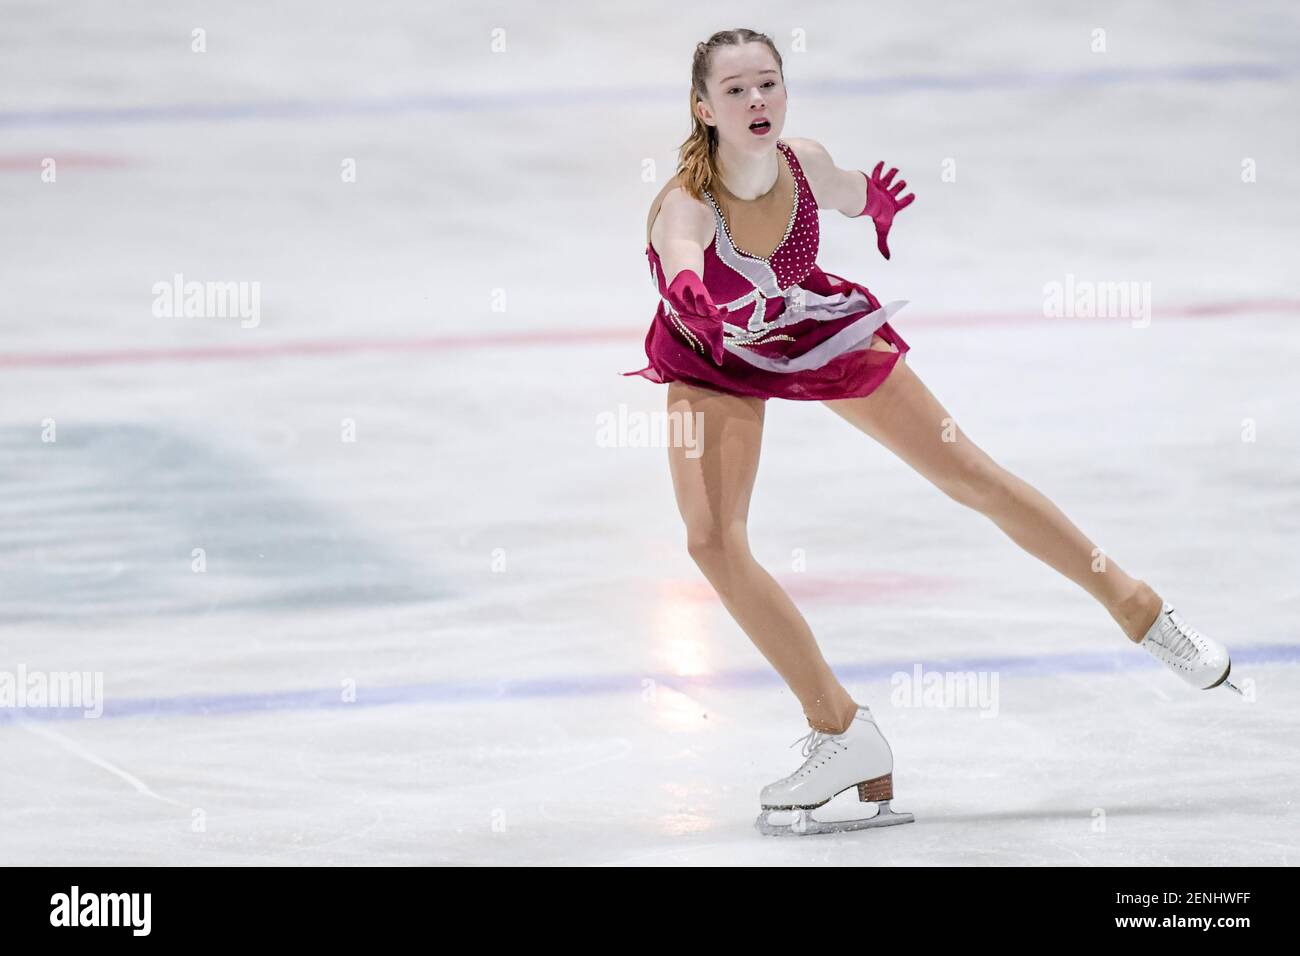 DEN HAAG, NETHERLANDS - FEBRUARY 26: Anete Lace of Latvia competes in the  ladies free skating program on Day 2 during the Challenge Cup 2021 match  between and at De Uithof on